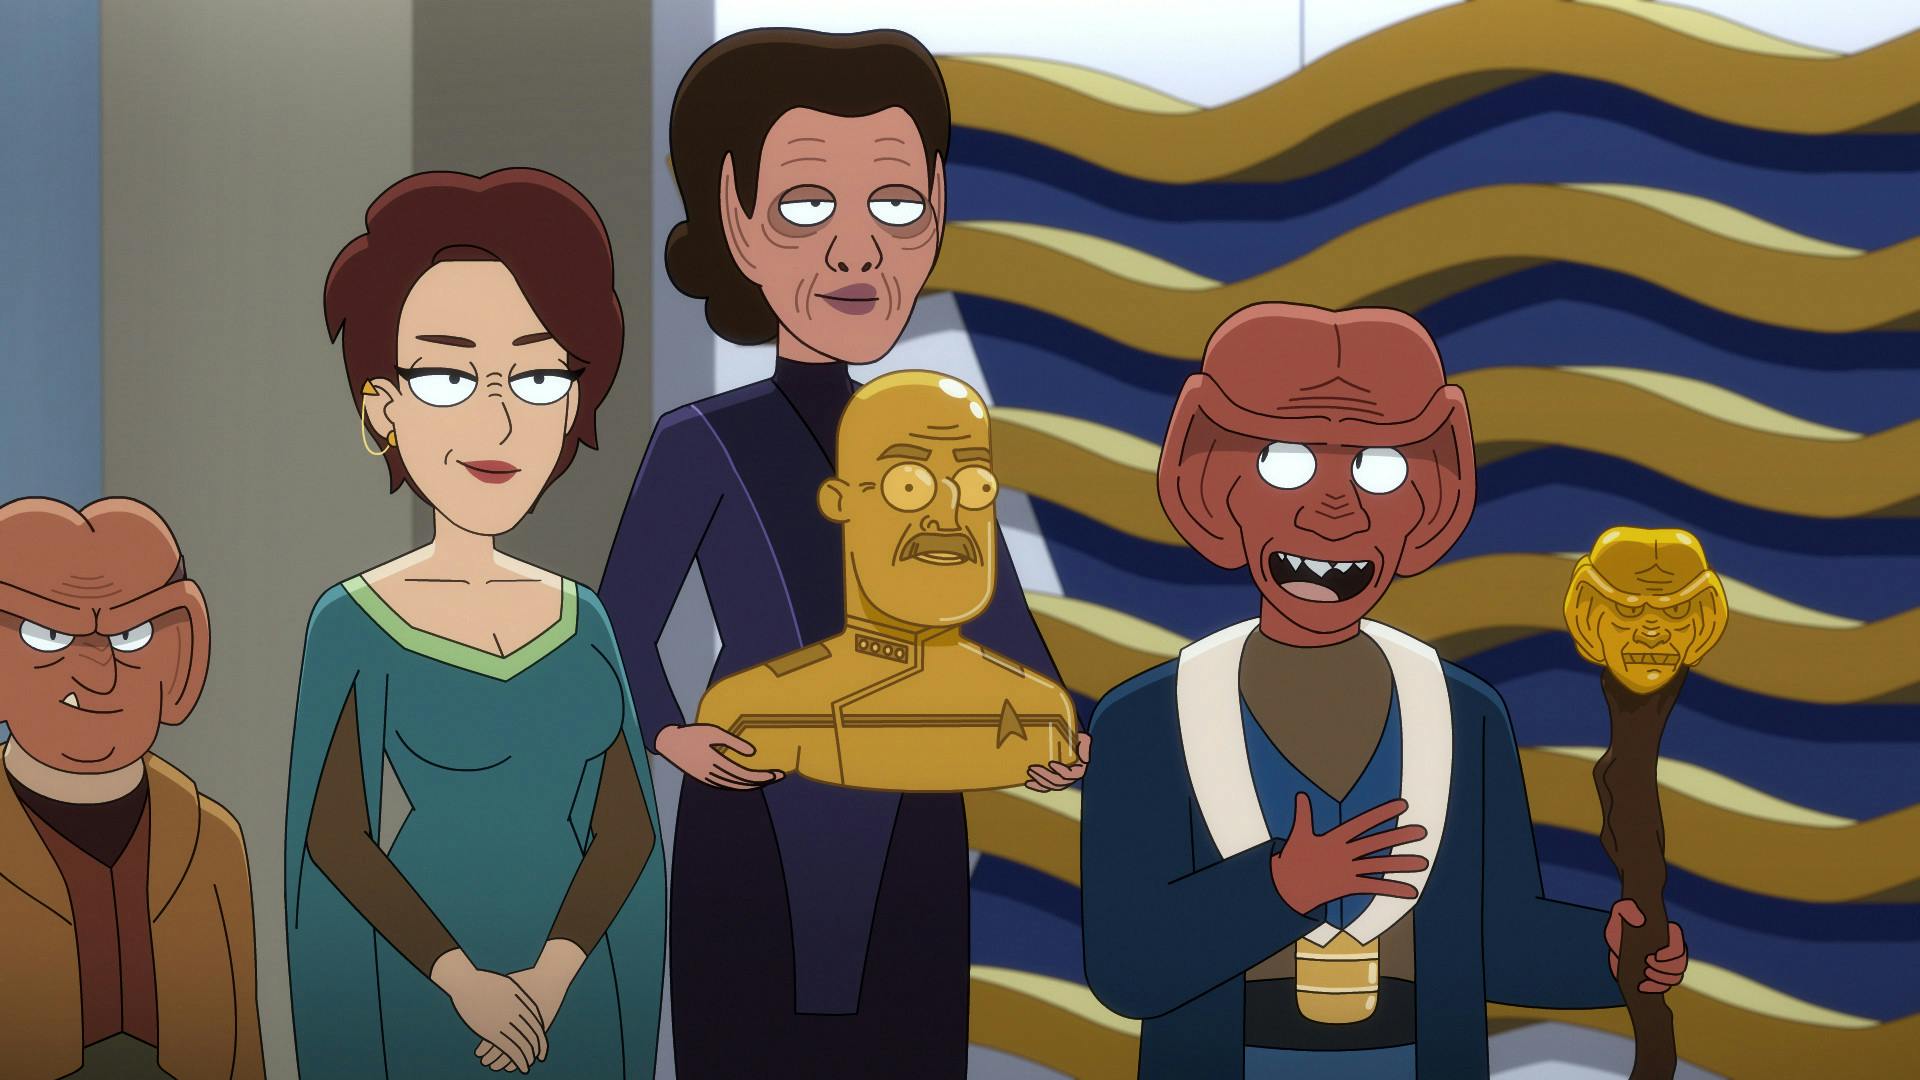 Aboard the U.S.S. Toronto, Grand Nagus Rom holding the Grand Nagus staff presents a golden bust of Admiral Vassery held by a Hupyrian servant as First Clerk Leeta stands between her and their Ferengi assistant in 'Parth Ferengi's Heart Place'